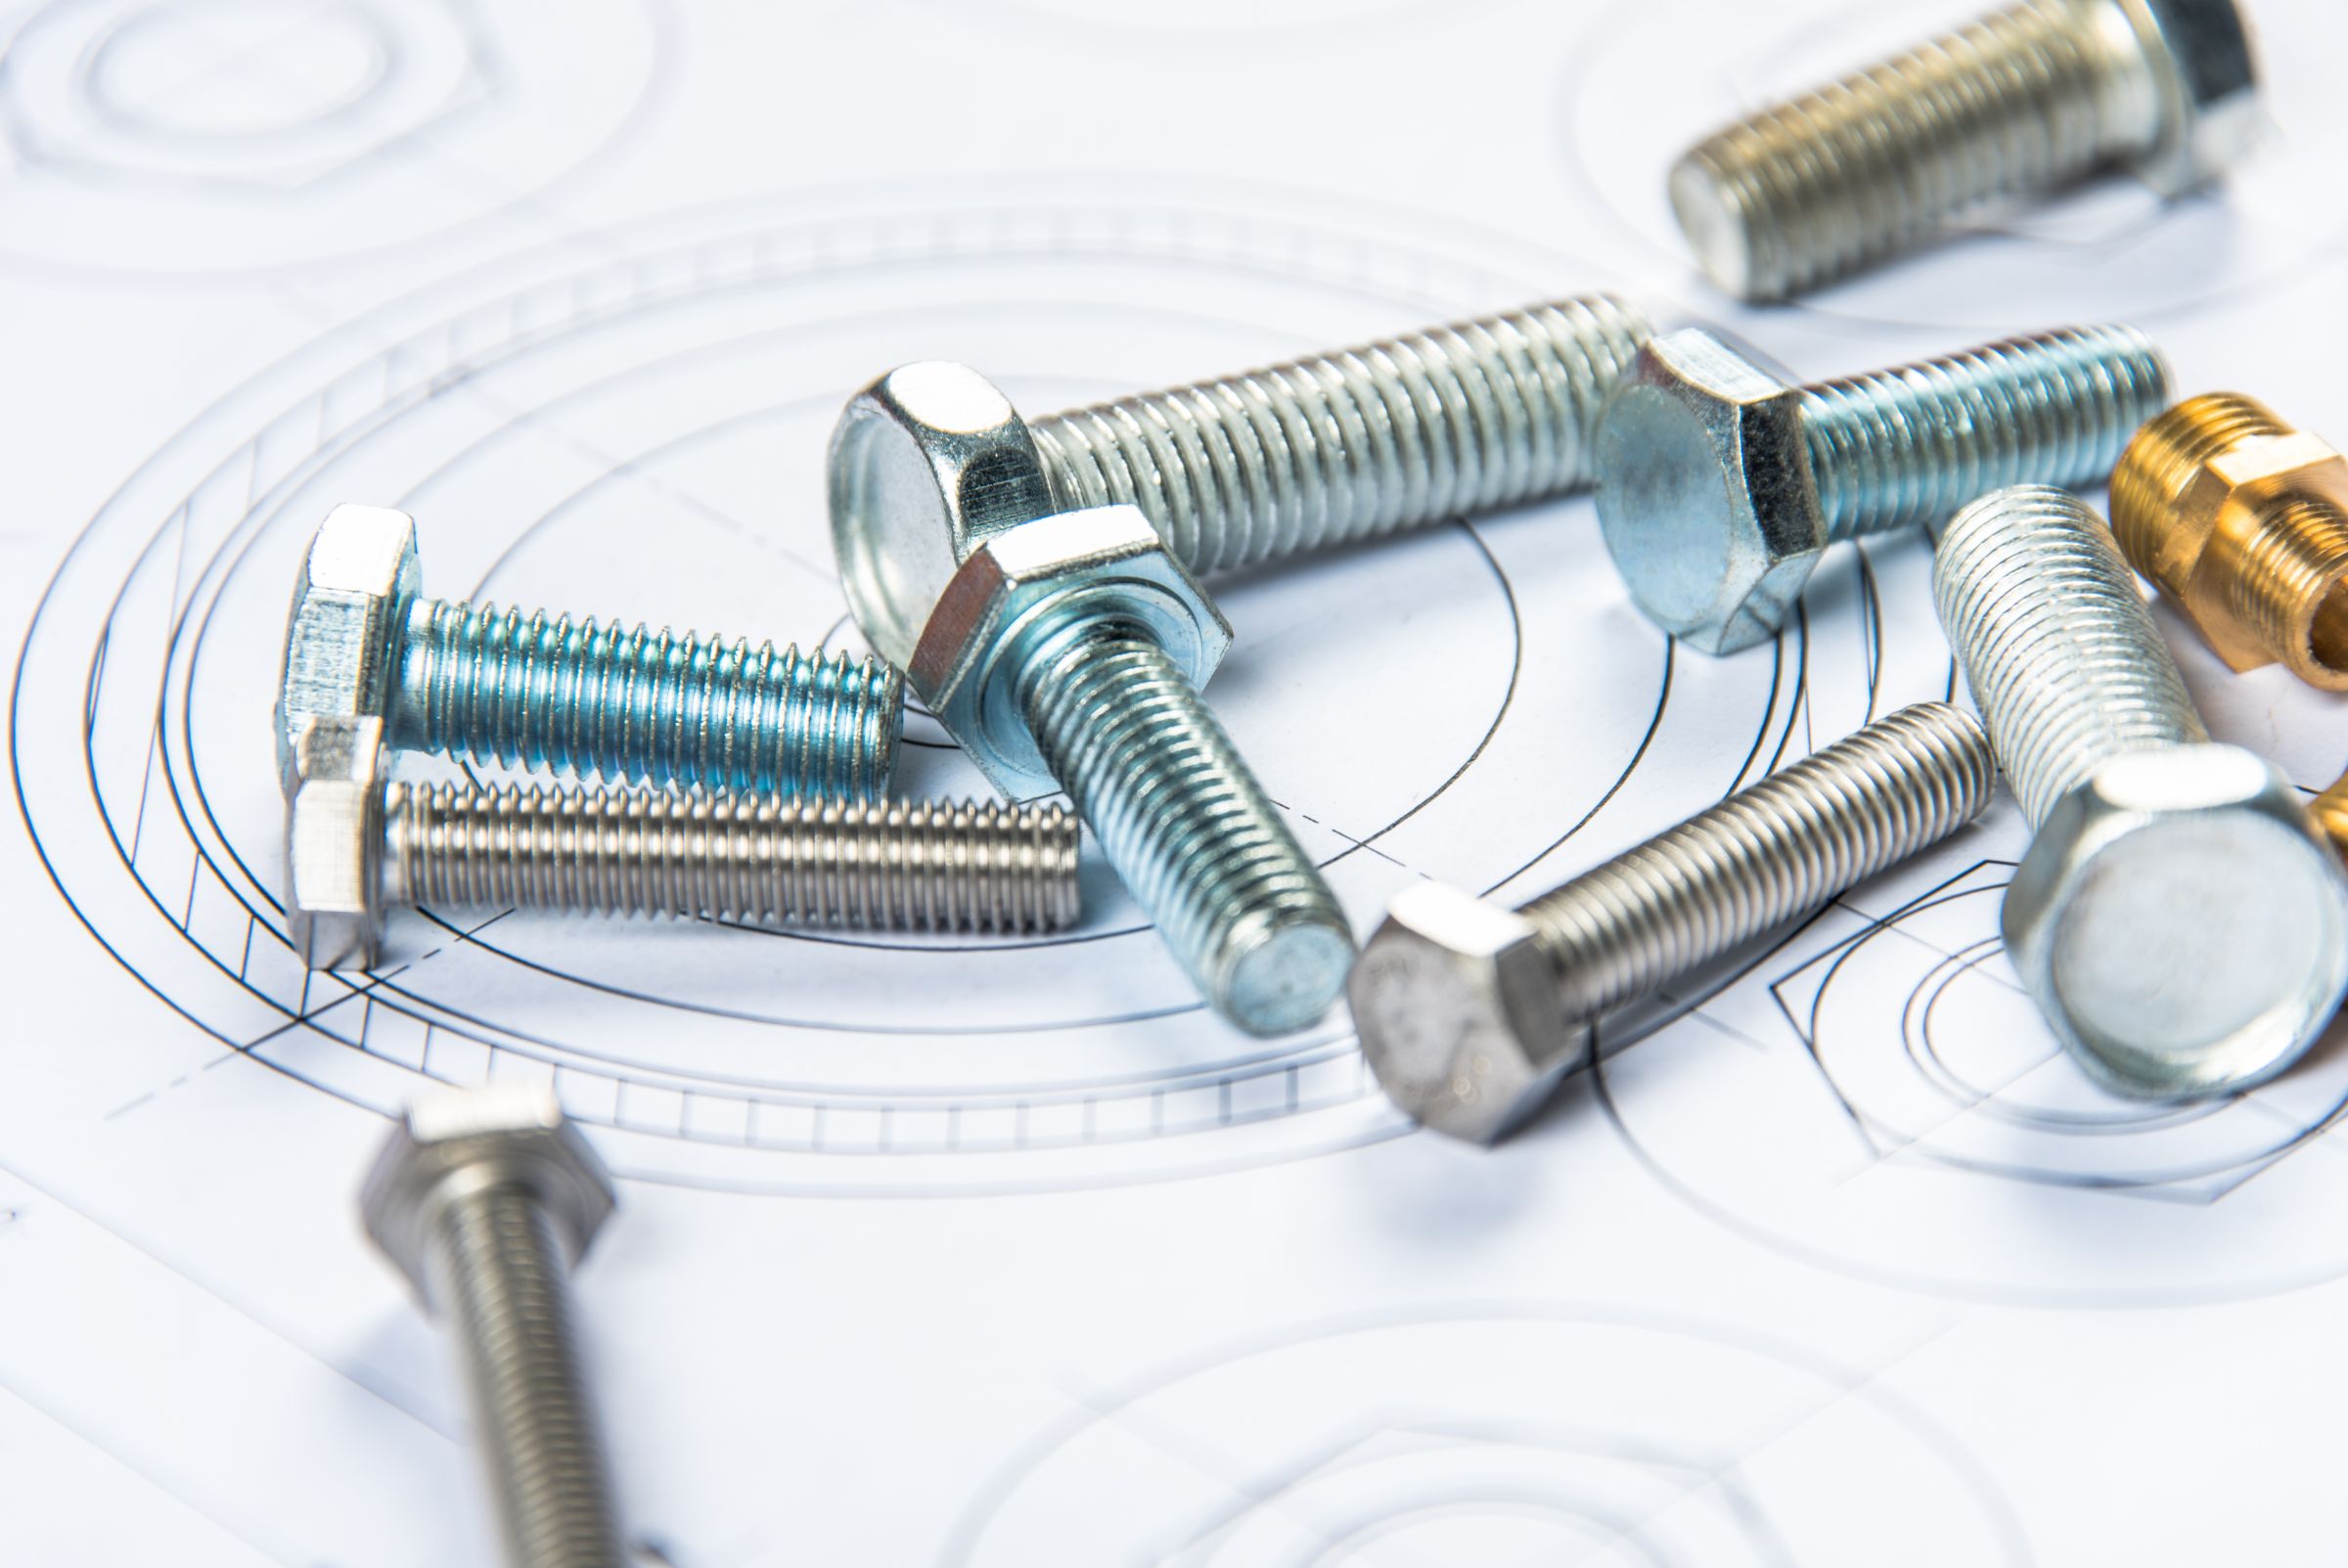 Do you have the display fasteners in stock?